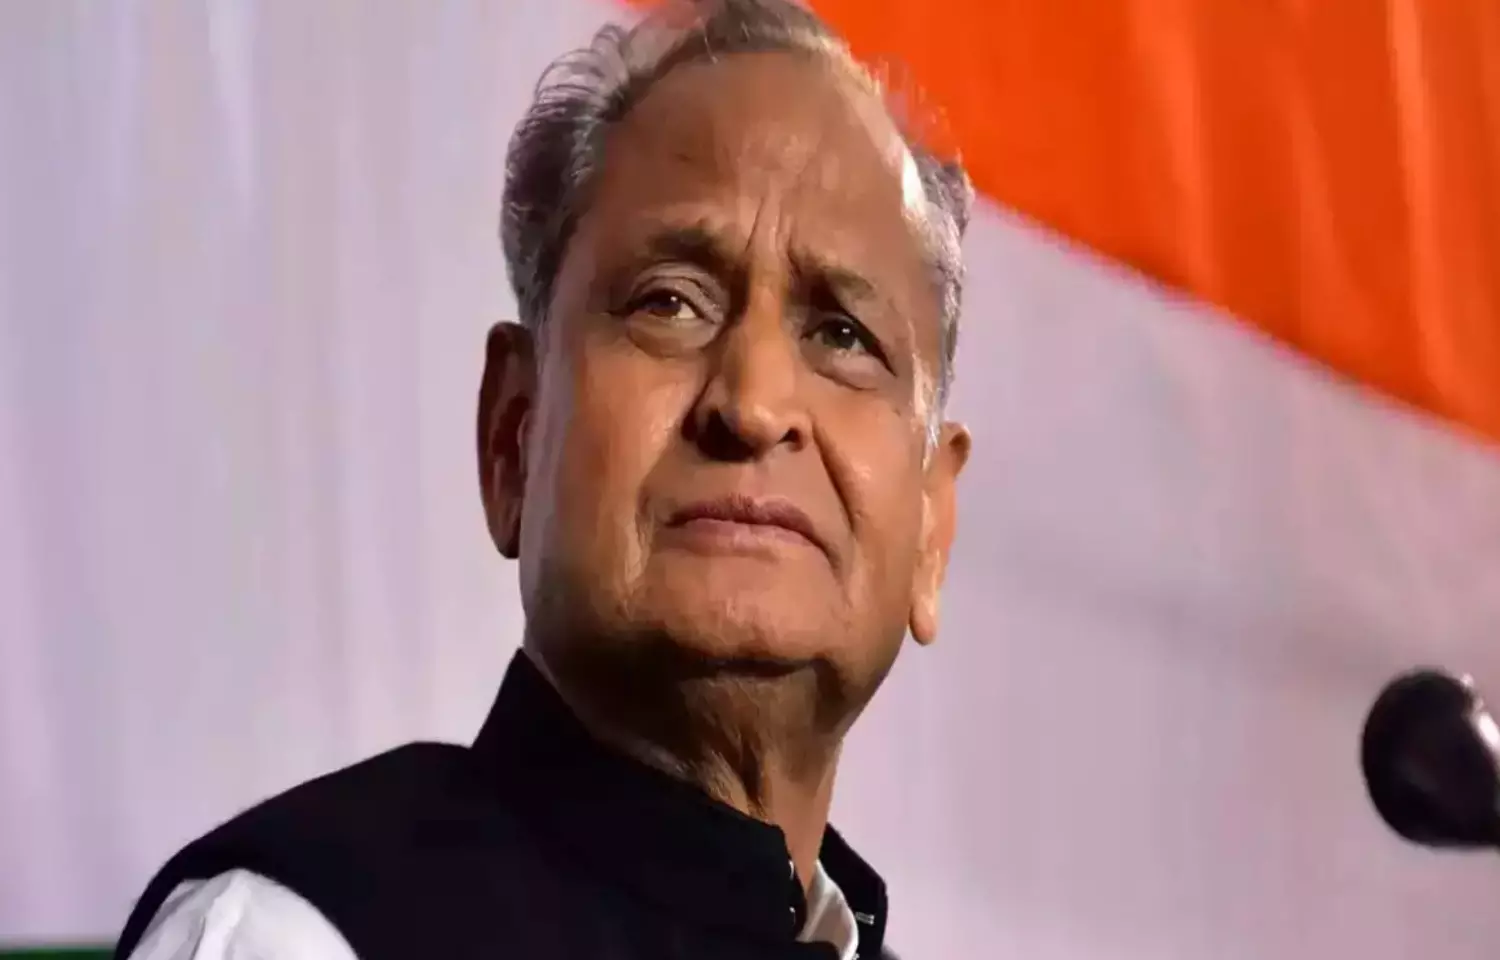 Rajasthan to get 1200 bedded Hospital with Helipad, says CM Ashok Gehlot